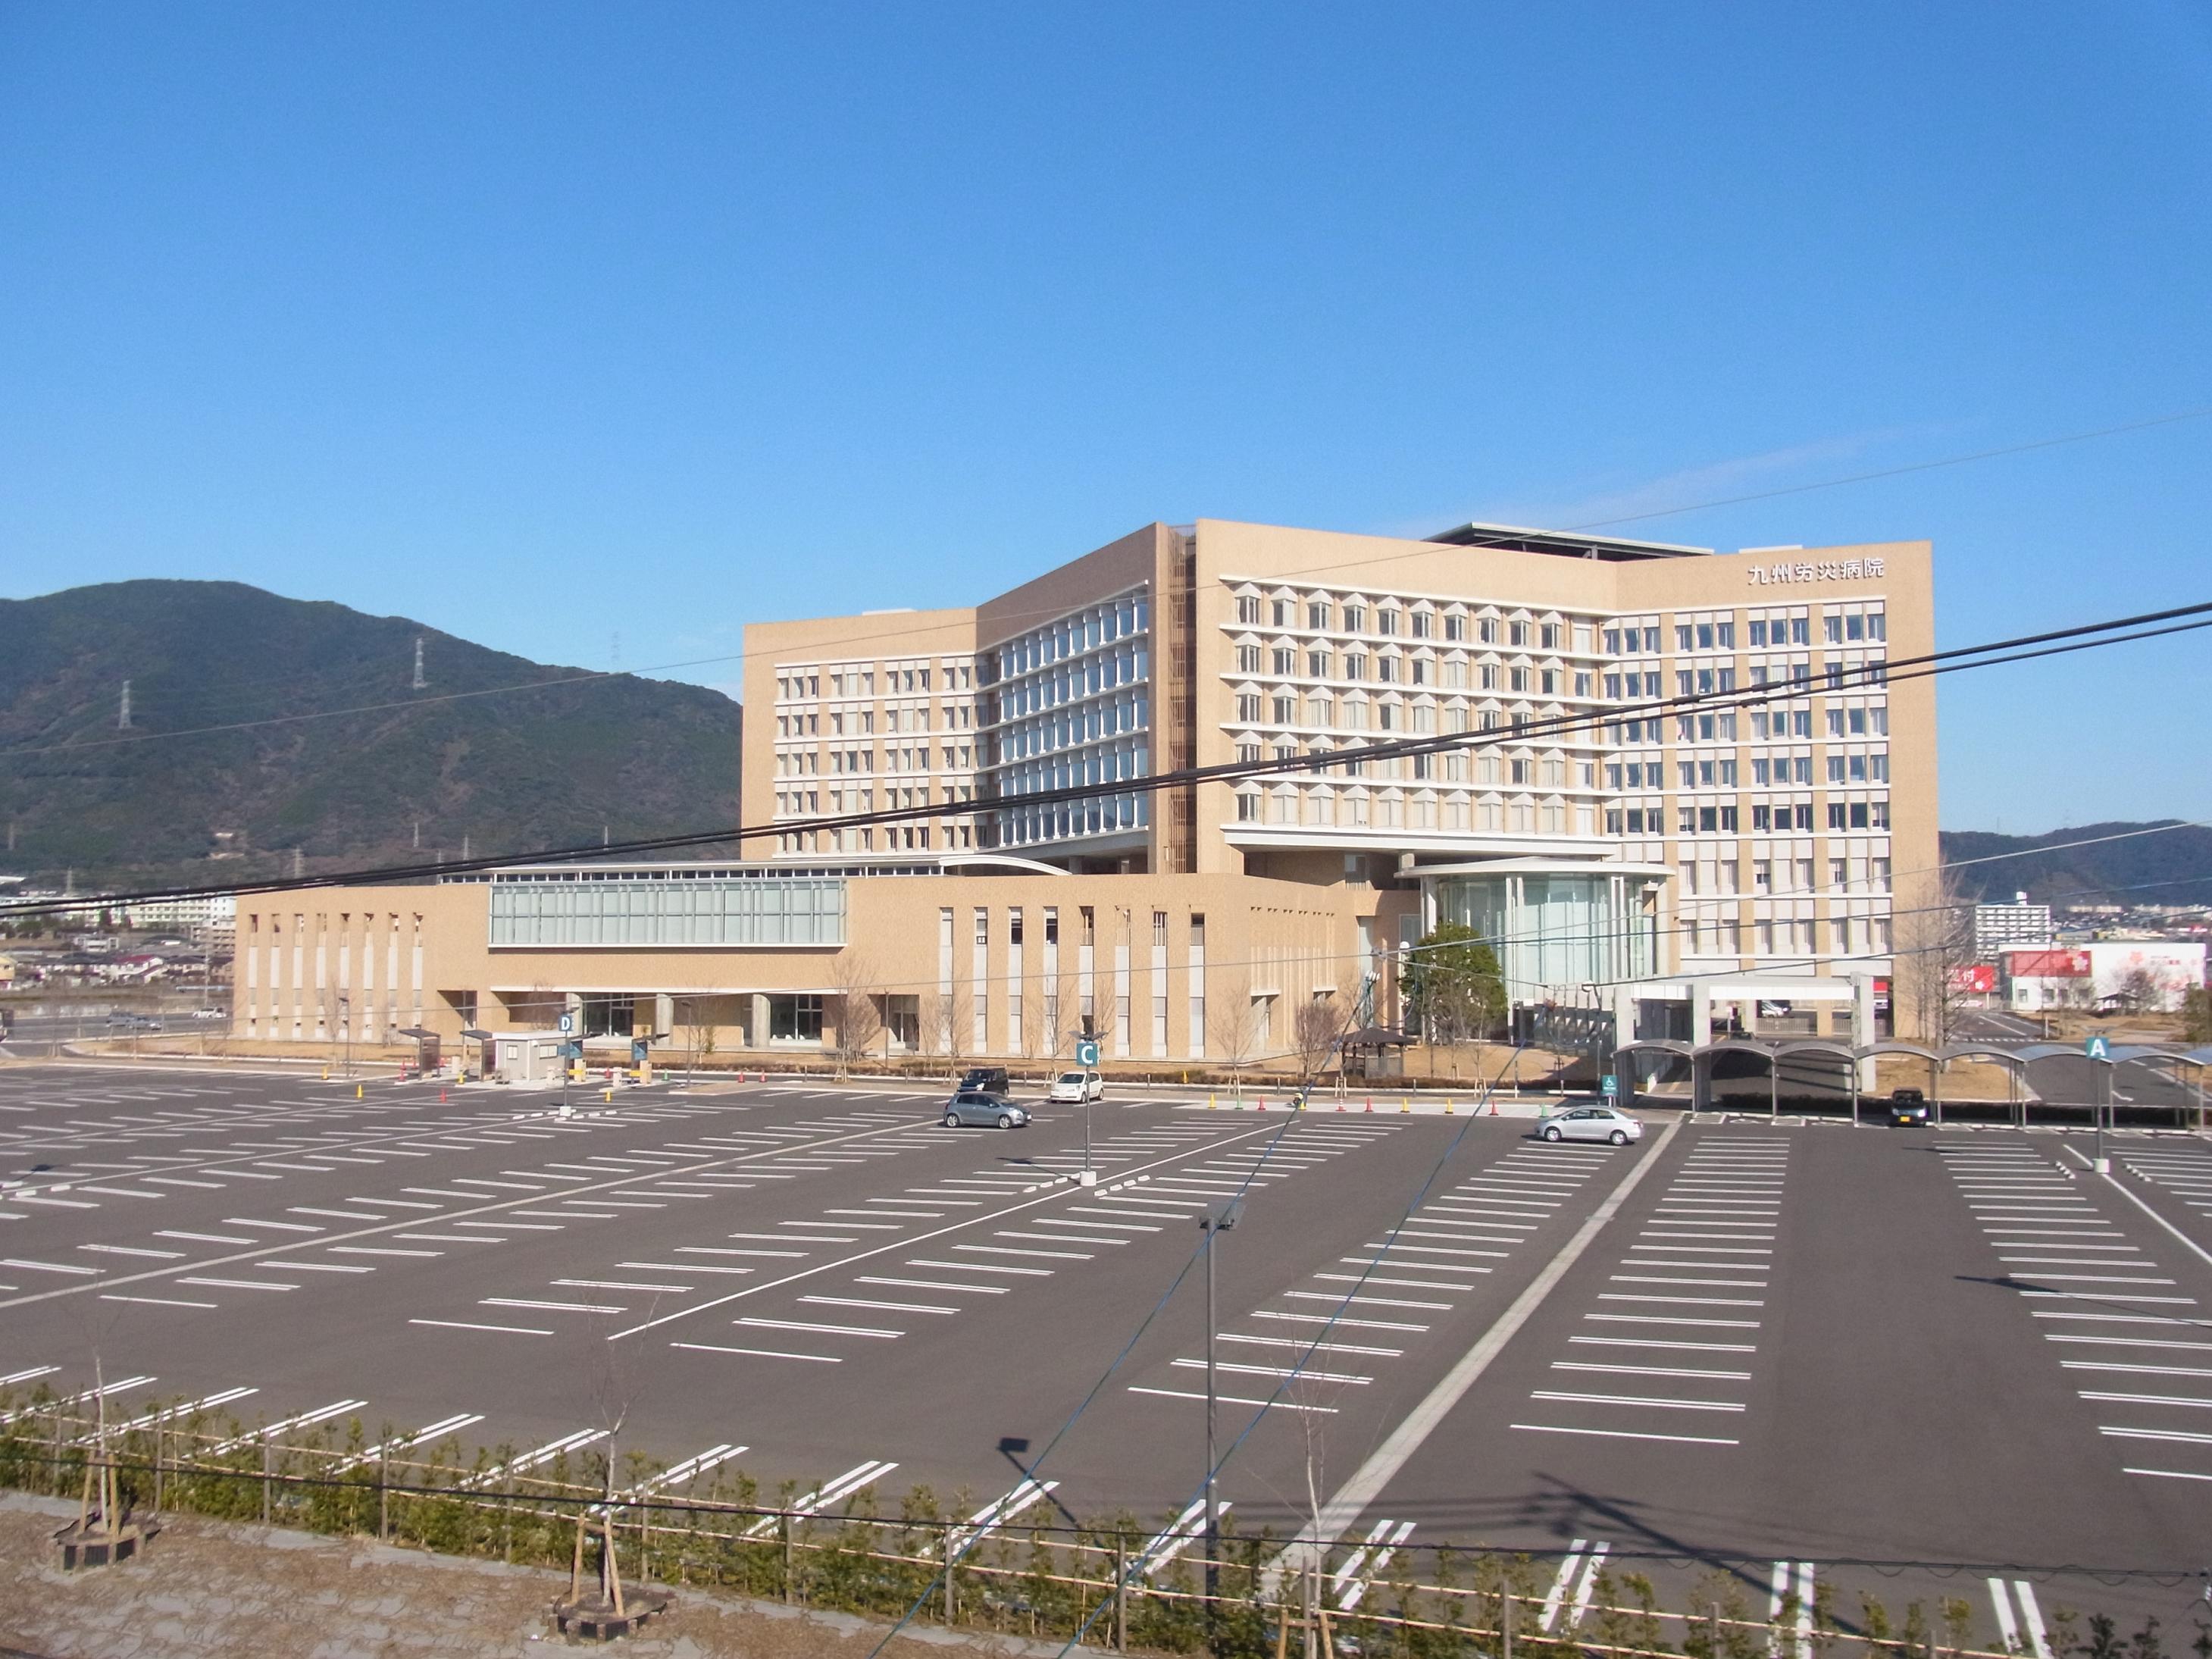 Hospital. 1330m to the National Institute of Labor Health and Welfare Organization Kyushurosaibyoin (hospital)